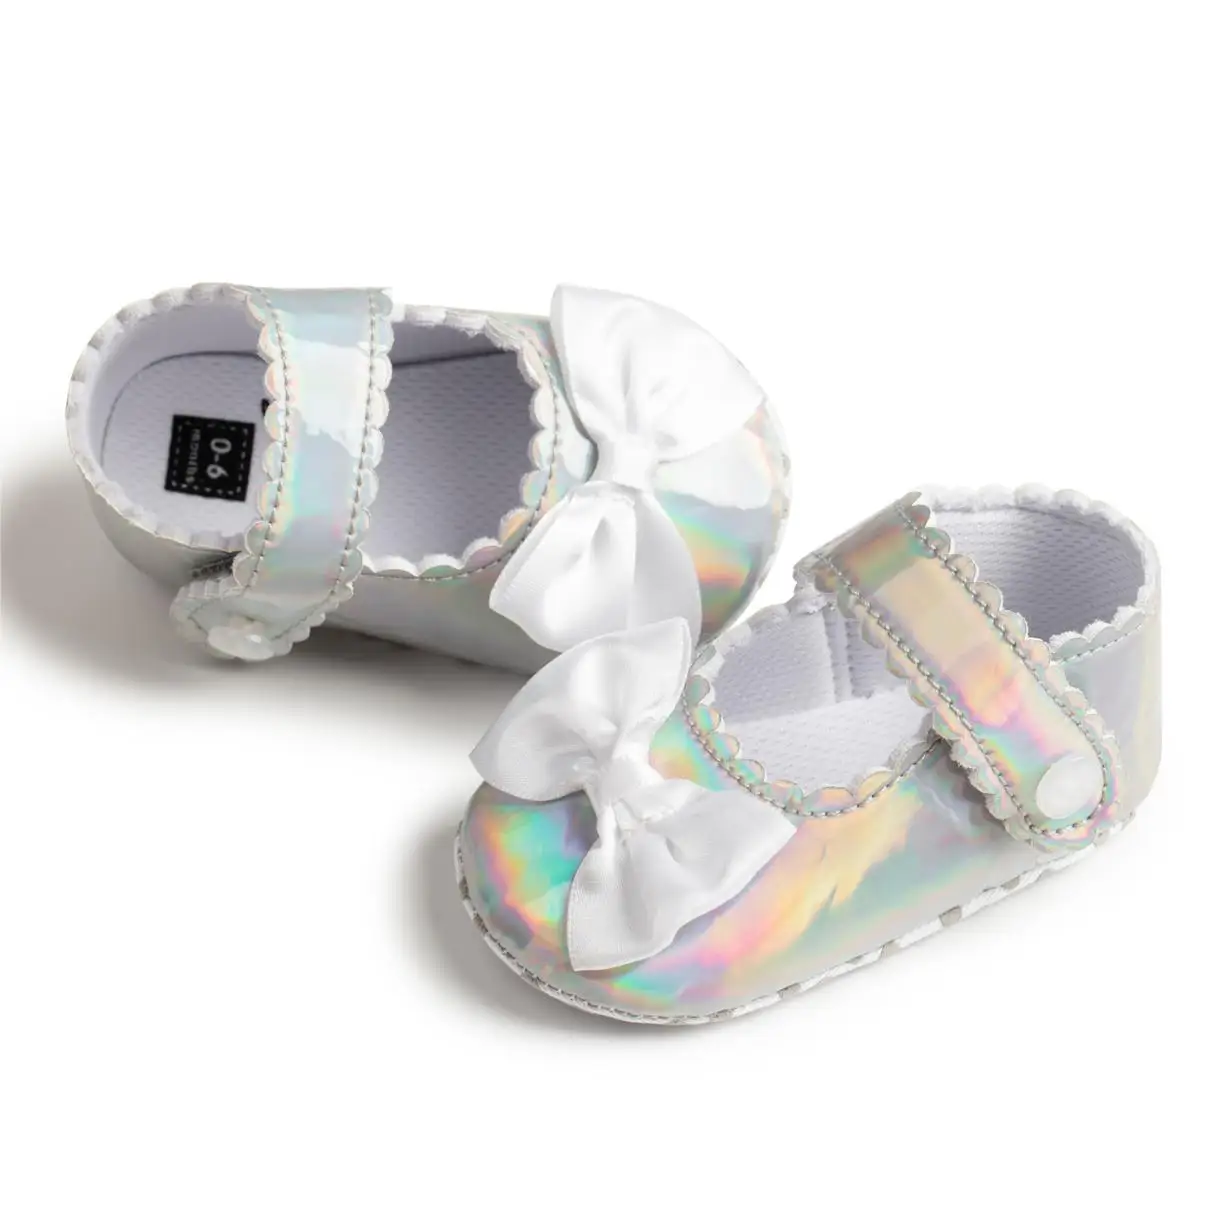 2023 Fashion Infant Footwear Wedding Party Mary Jane Bowknot New Design Princess Baby Girl Shoes